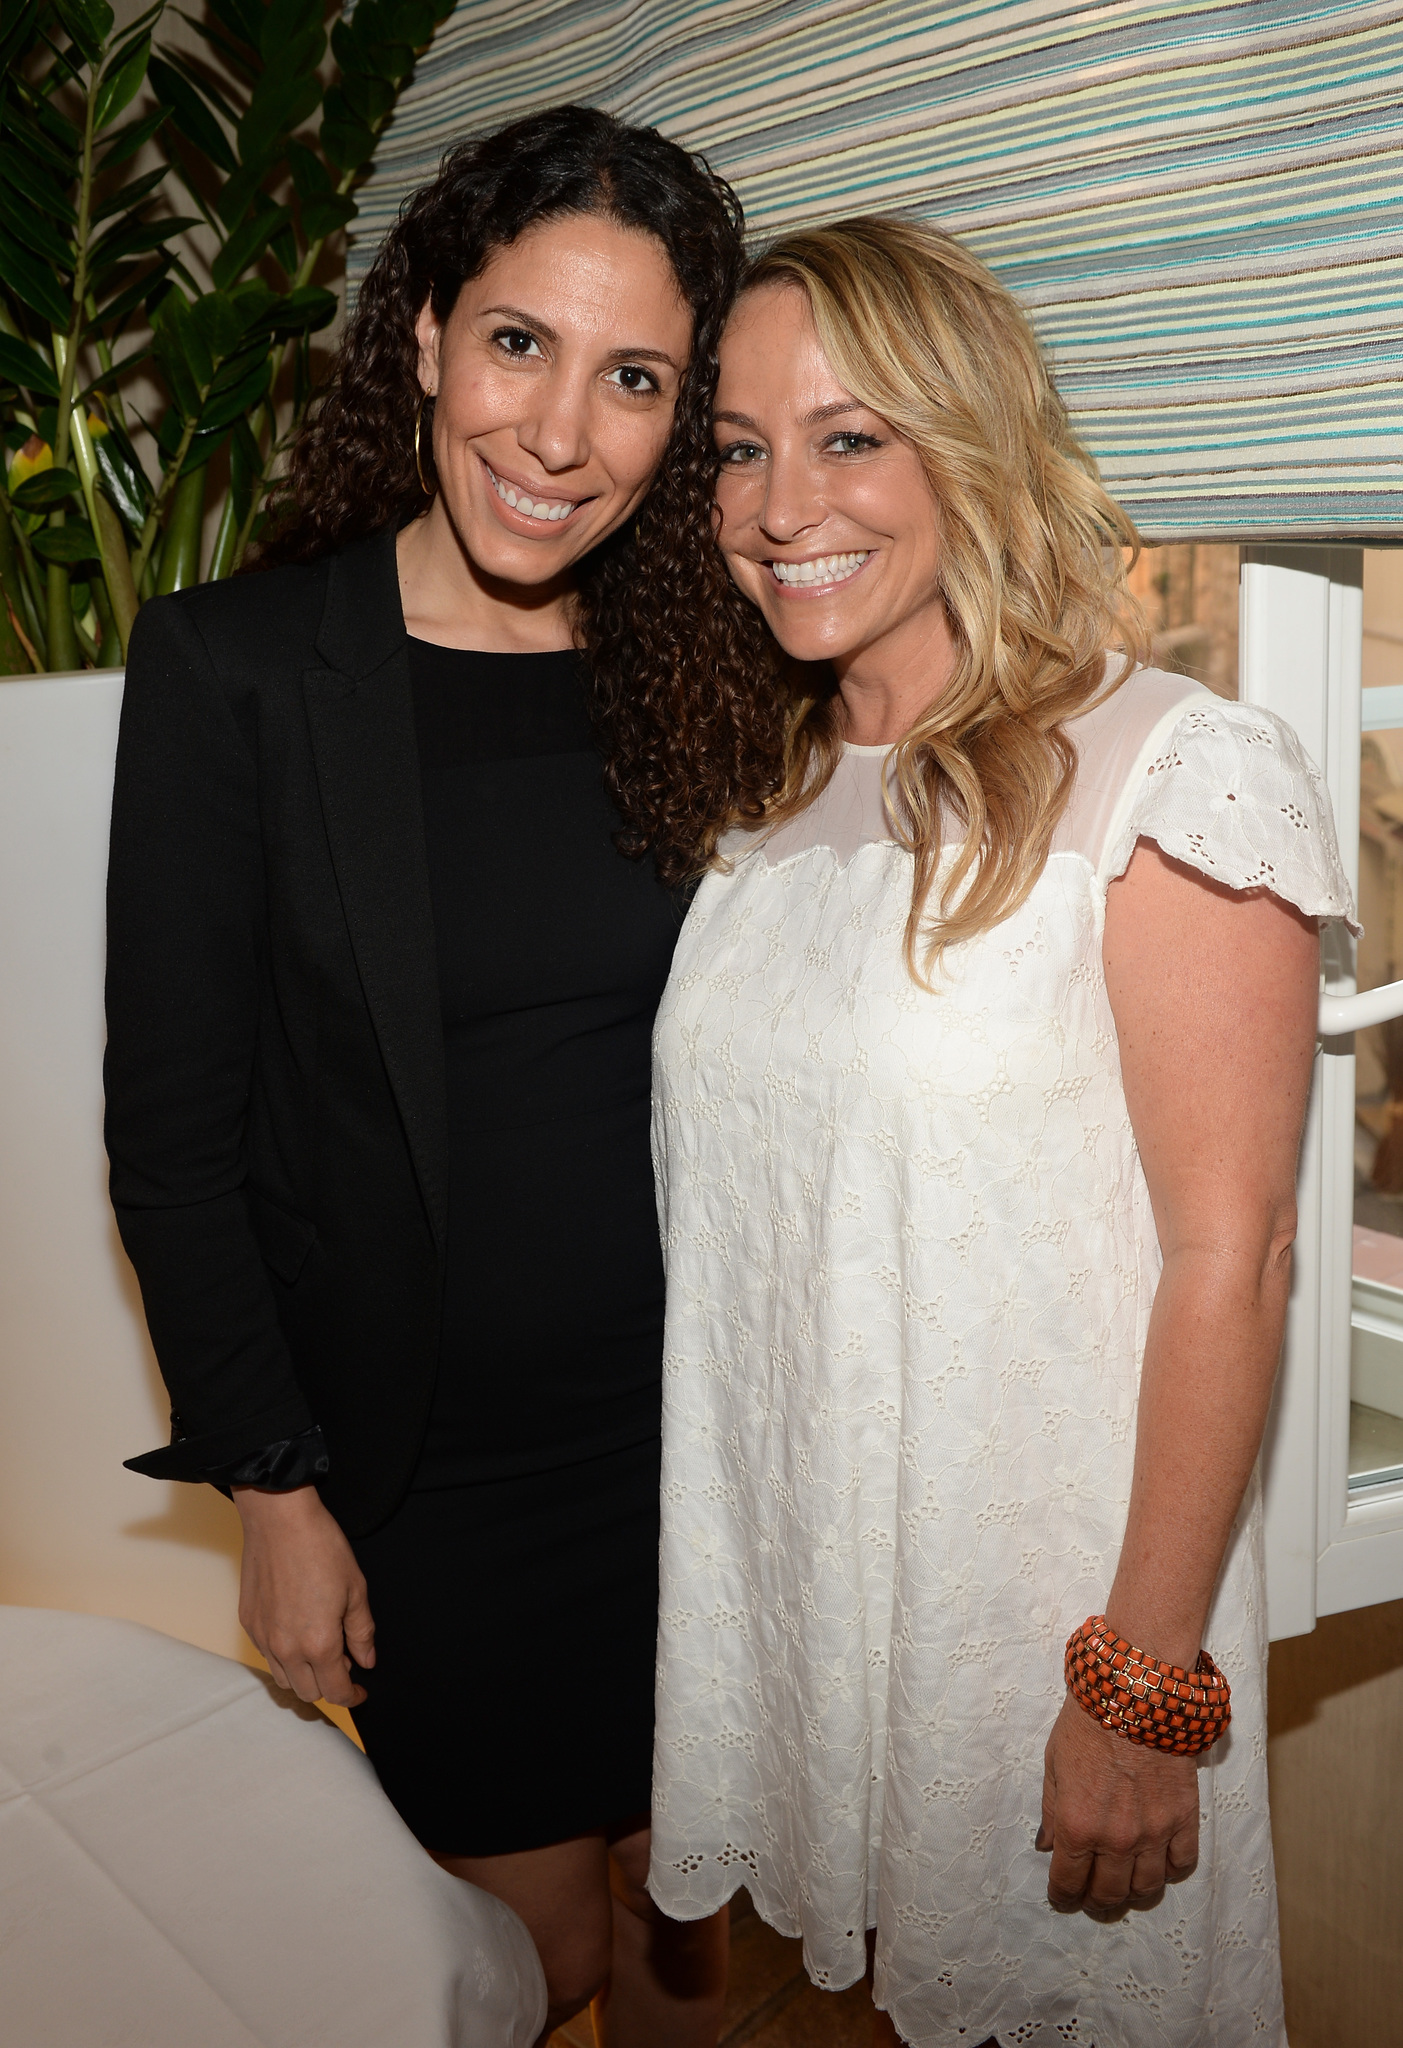 IMDb's Yasmine Hanani and Emily Glassman attend the IMDB's 2013 Cannes Film Festival Dinner Party during the 66th Annual Cannes Film Festival at Restaurant Mantel on May 20, 2013 in Cannes, France.